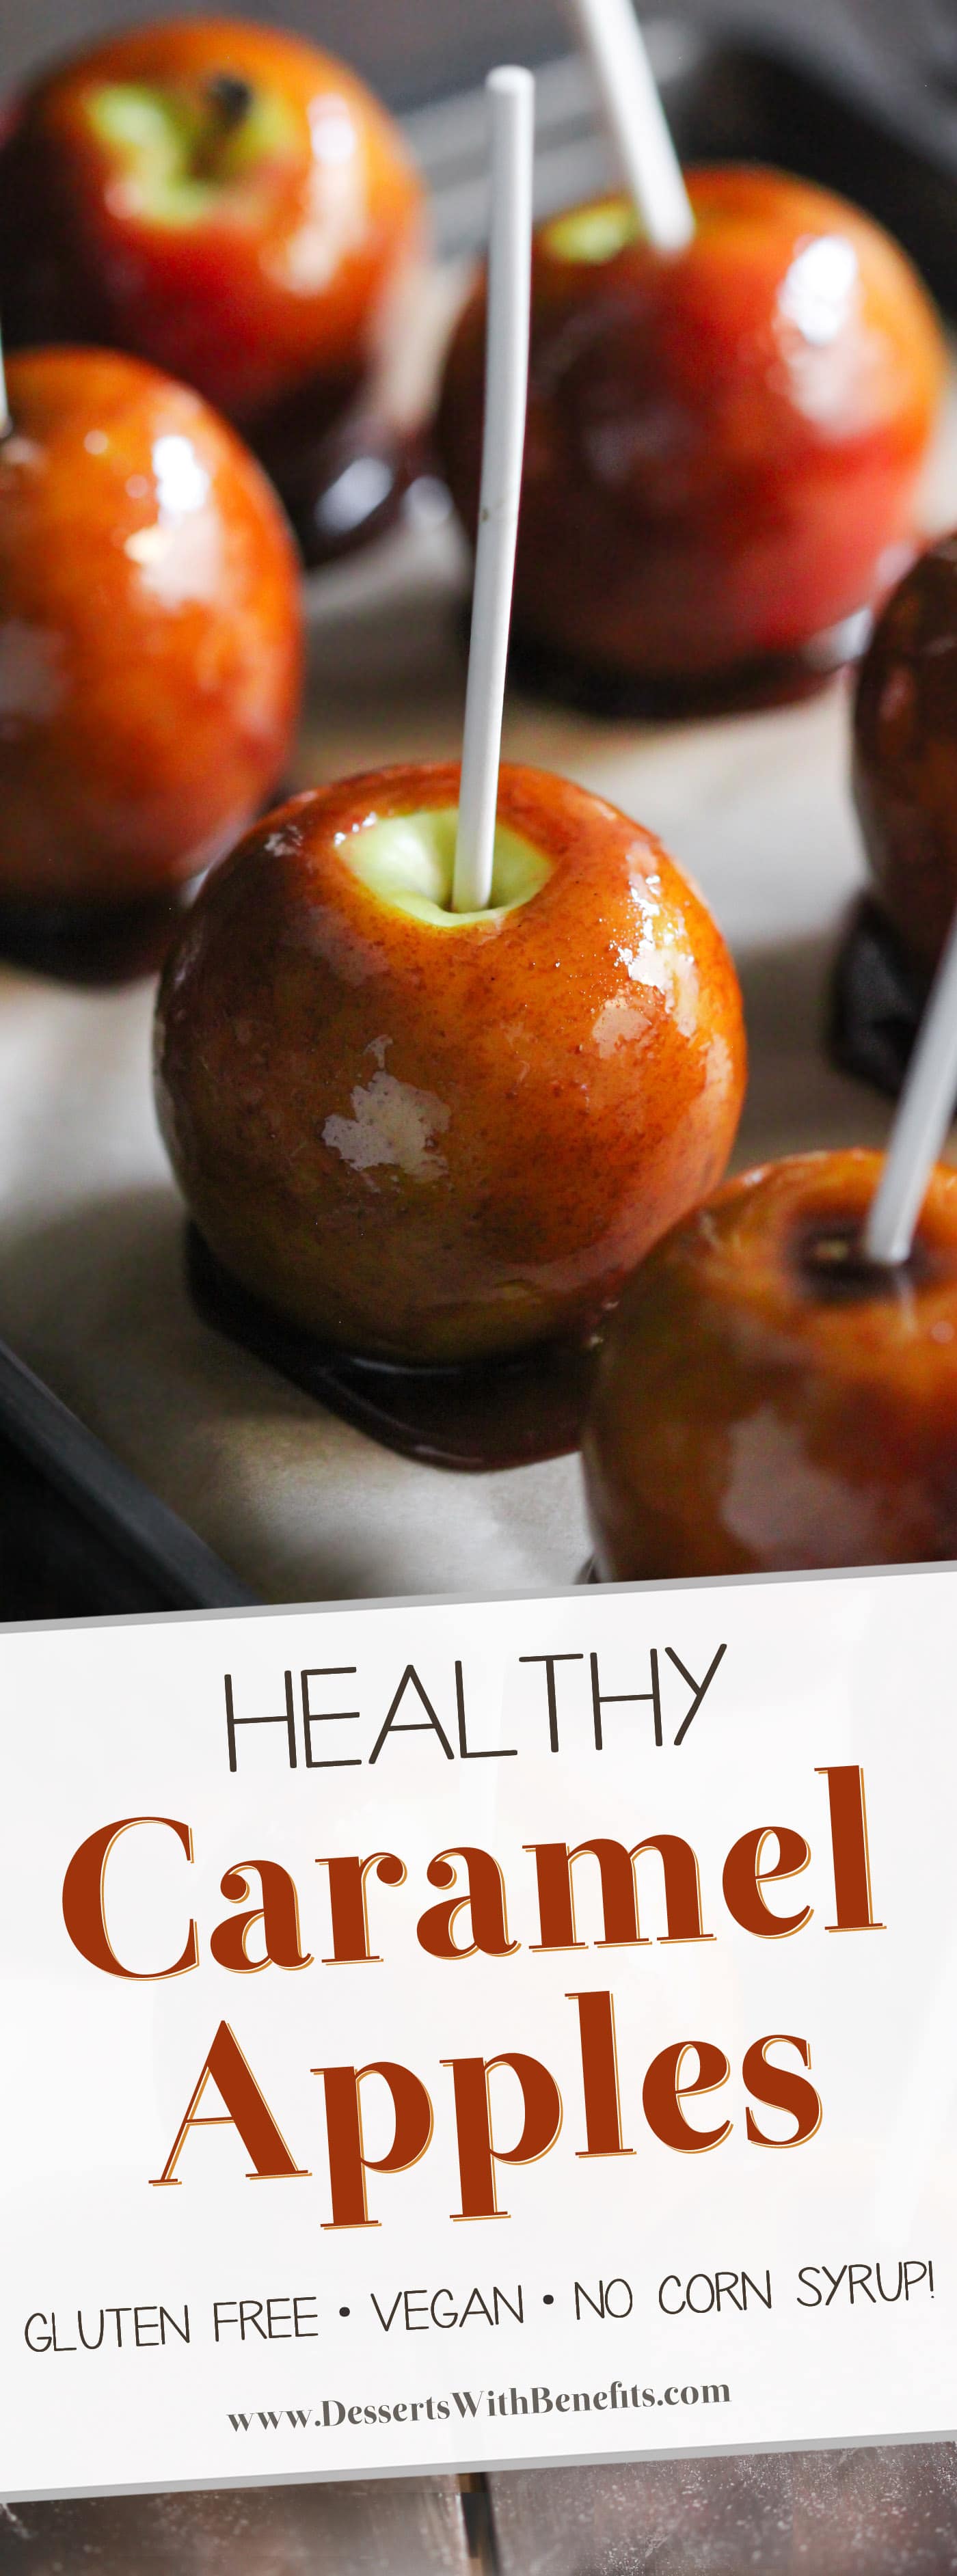 Healthy Caramel Apples! Love Caramel Apples but don't want all the sugar, corn syrup, cream, or butter? Make them at home! These sweet, crunchy apples are coated in a rich, sticky caramel. They're so addicting you'd NEVER suspect they're refined sugar free (made without corn syrup!), dairy free, and vegan. Healthy Dessert Recipes at the Desserts With Benefits Blog (www.DessertsWithBenefits.com)